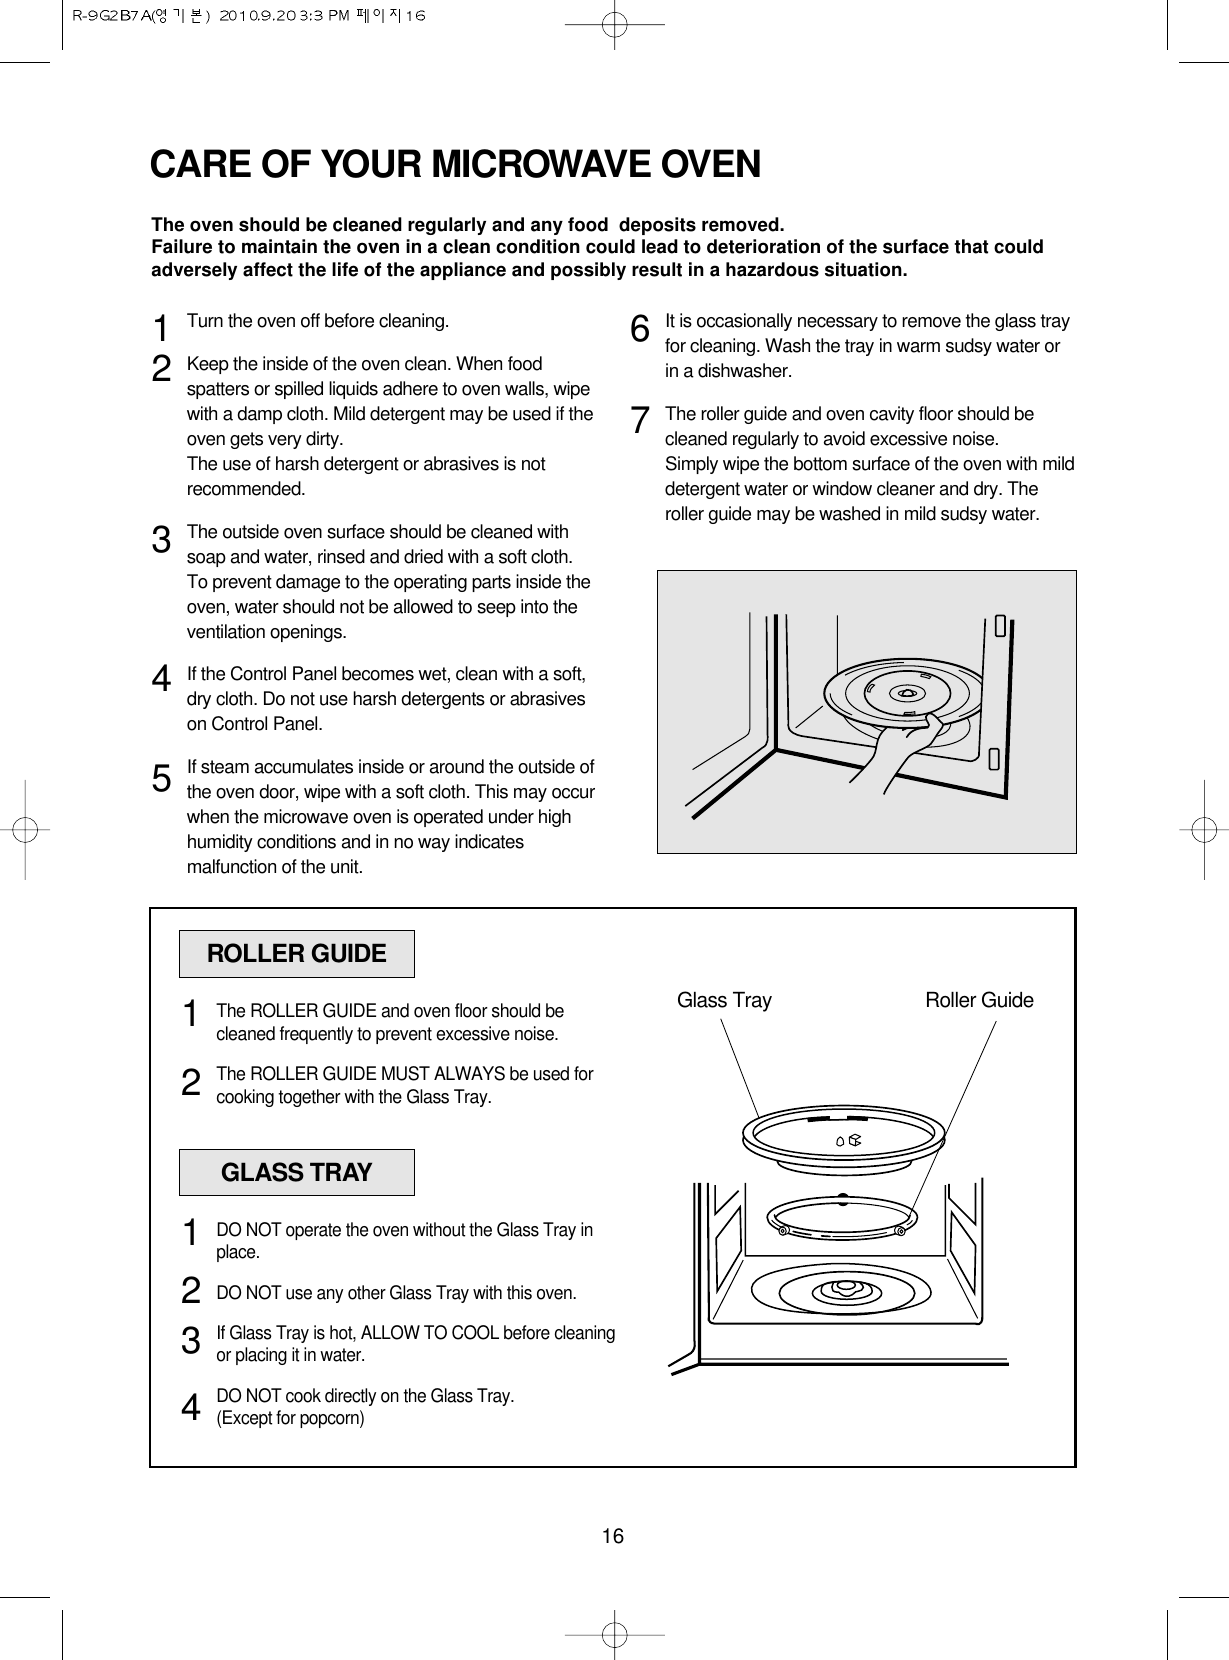 16CARE OF YOUR MICROWAVE OVENTurn the oven off before cleaning.Keep the inside of the oven clean. When foodspatters or spilled liquids adhere to oven walls, wipewith a damp cloth. Mild detergent may be used if theoven gets very dirty. The use of harsh detergent or abrasives is notrecommended.The outside oven surface should be cleaned withsoap and water, rinsed and dried with a soft cloth.To prevent damage to the operating parts inside theoven, water should not be allowed to seep into theventilation openings.If the Control Panel becomes wet, clean with a soft,dry cloth. Do not use harsh detergents or abrasiveson Control Panel.If steam accumulates inside or around the outside ofthe oven door, wipe with a soft cloth. This may occurwhen the microwave oven is operated under highhumidity conditions and in no way indicatesmalfunction of the unit.It is occasionally necessary to remove the glass trayfor cleaning. Wash the tray in warm sudsy water orin a dishwasher.The roller guide and oven cavity floor should becleaned regularly to avoid excessive noise. Simply wipe the bottom surface of the oven with milddetergent water or window cleaner and dry. Theroller guide may be washed in mild sudsy water.1234567The oven should be cleaned regularly and any food  deposits removed.Failure to maintain the oven in a clean condition could lead to deterioration of the surface that couldadversely affect the life of the appliance and possibly result in a hazardous situation.ROLLER GUIDEGlass Tray Roller GuideThe ROLLER GUIDE and oven floor should becleaned frequently to prevent excessive noise.The ROLLER GUIDE MUST ALWAYS be used forcooking together with the Glass Tray.12GLASS TRAYDO NOT operate the oven without the Glass Tray inplace.DO NOT use any other Glass Tray with this oven.If Glass Tray is hot, ALLOW TO COOL before cleaningor placing it in water.DO NOT cook directly on the Glass Tray.(Except for popcorn)1234